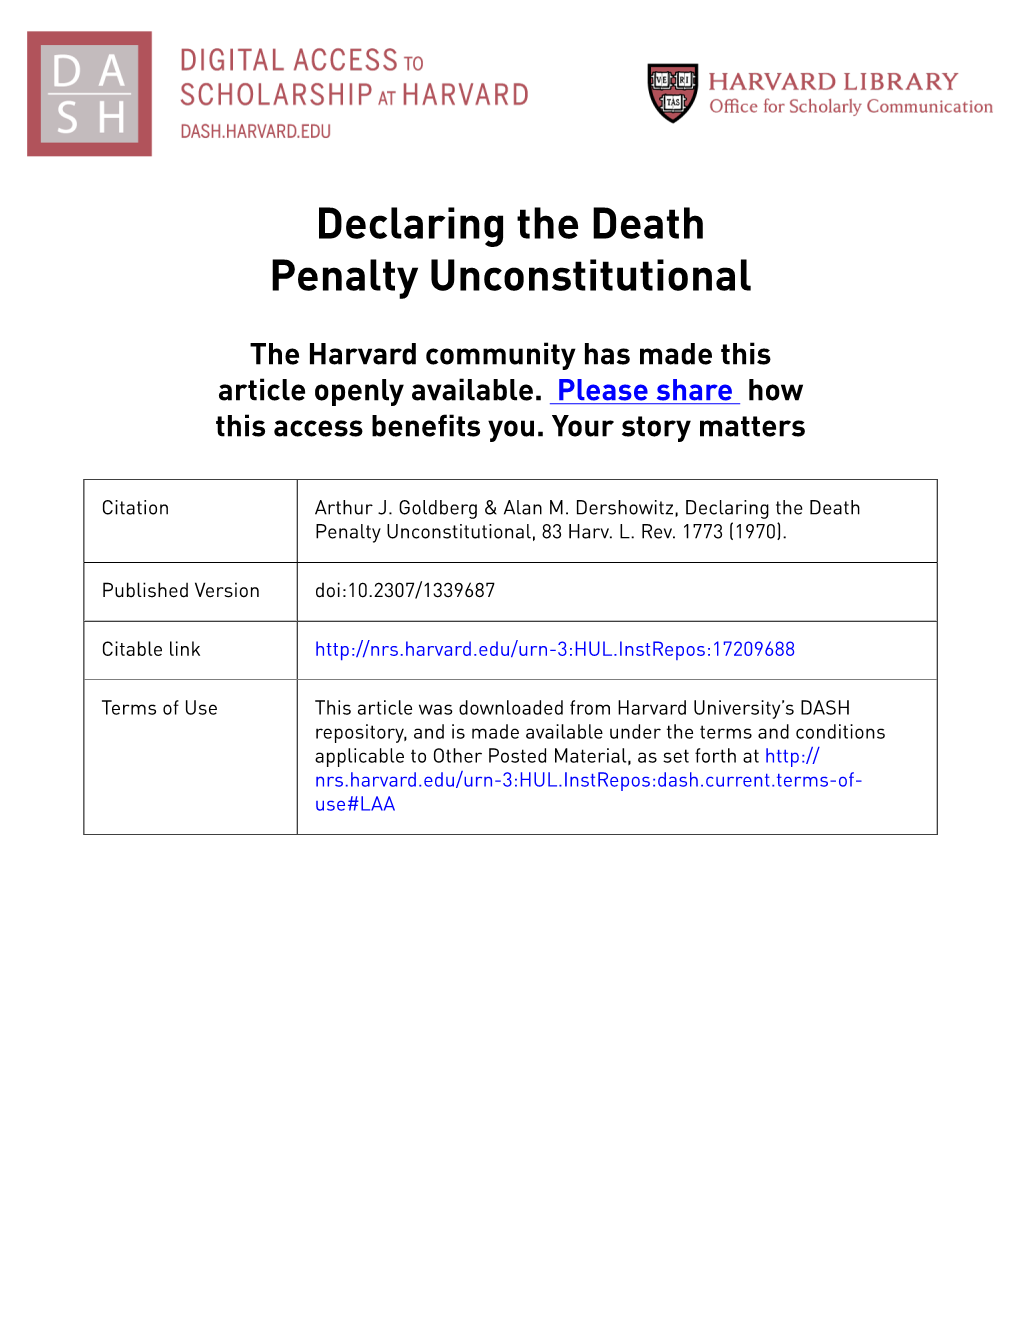 Declaring the Death Penalty Unconstitutional